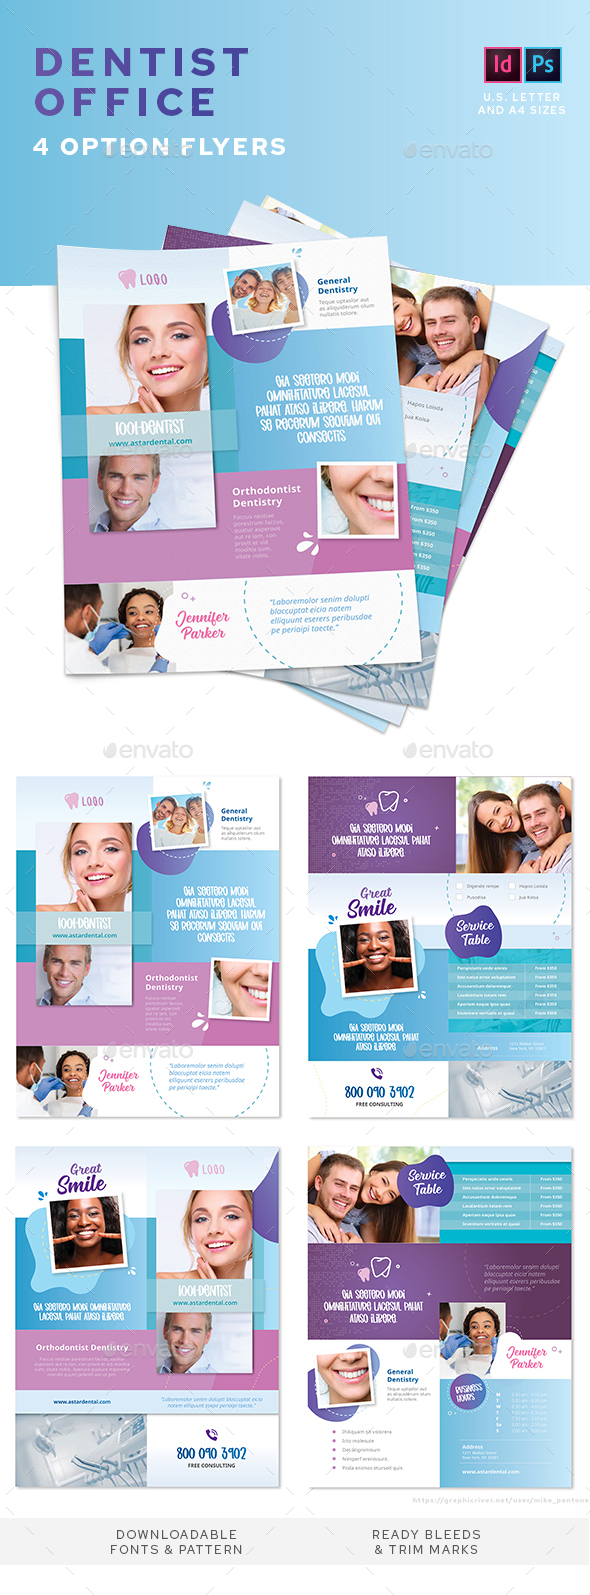 Dentist Office Flyers – 4 Options